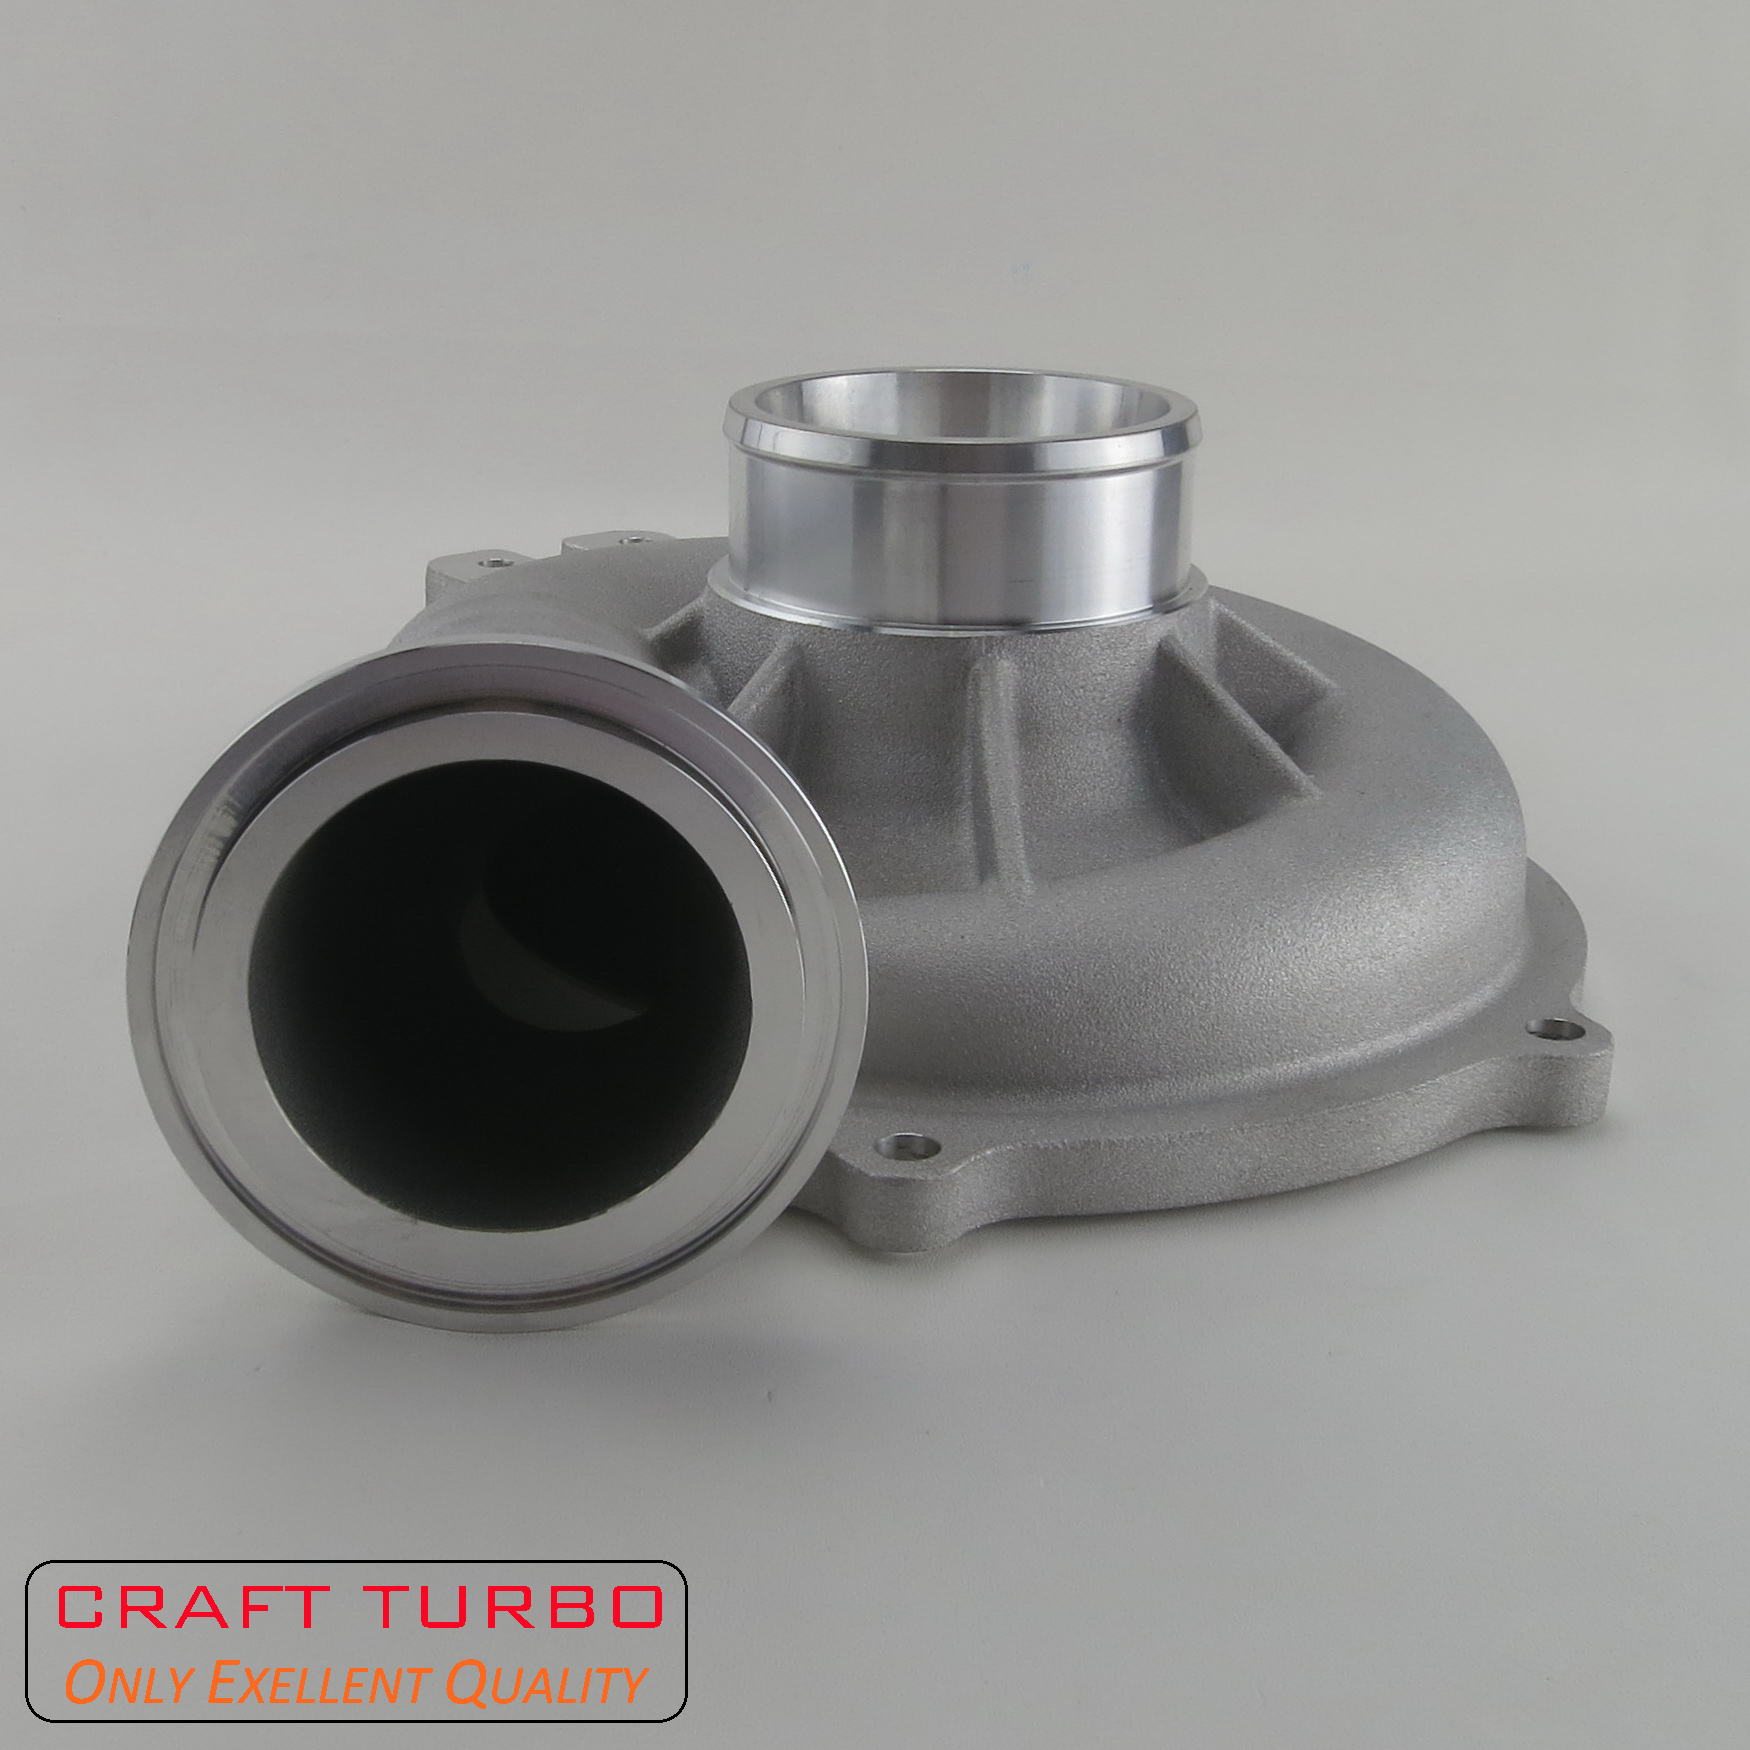 GTP38 702012-5012S/ 702012-0006/ 702012-0010 Compressor Housing for Turbocharger